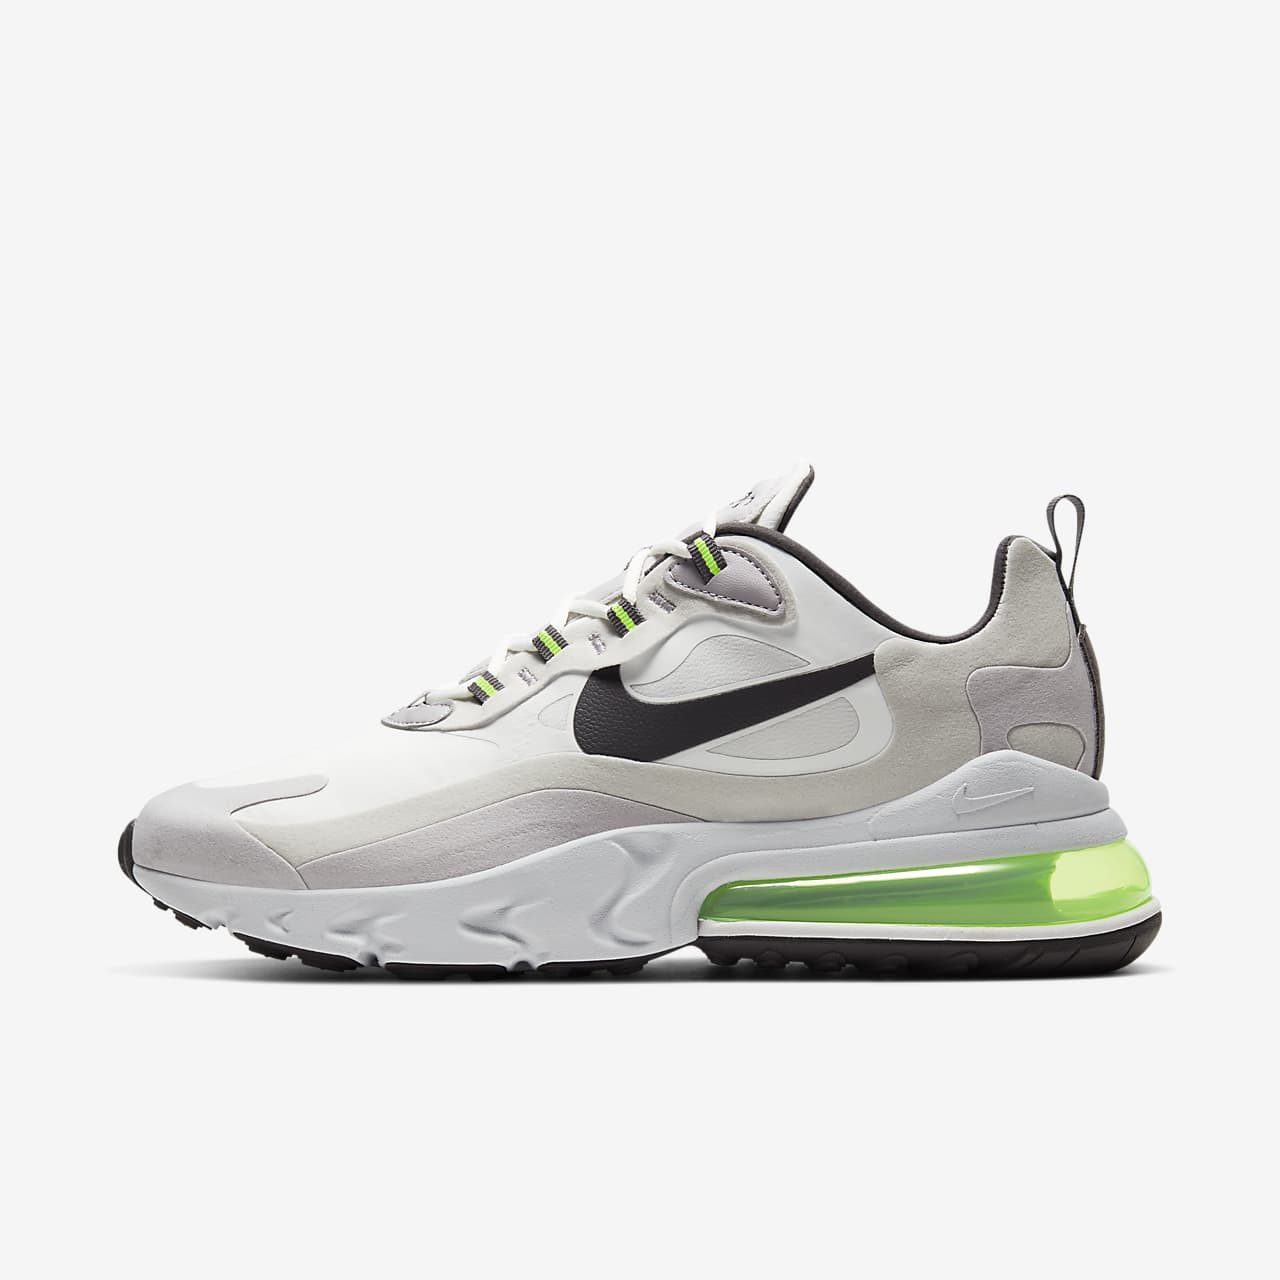 when did nike air max 270 come out